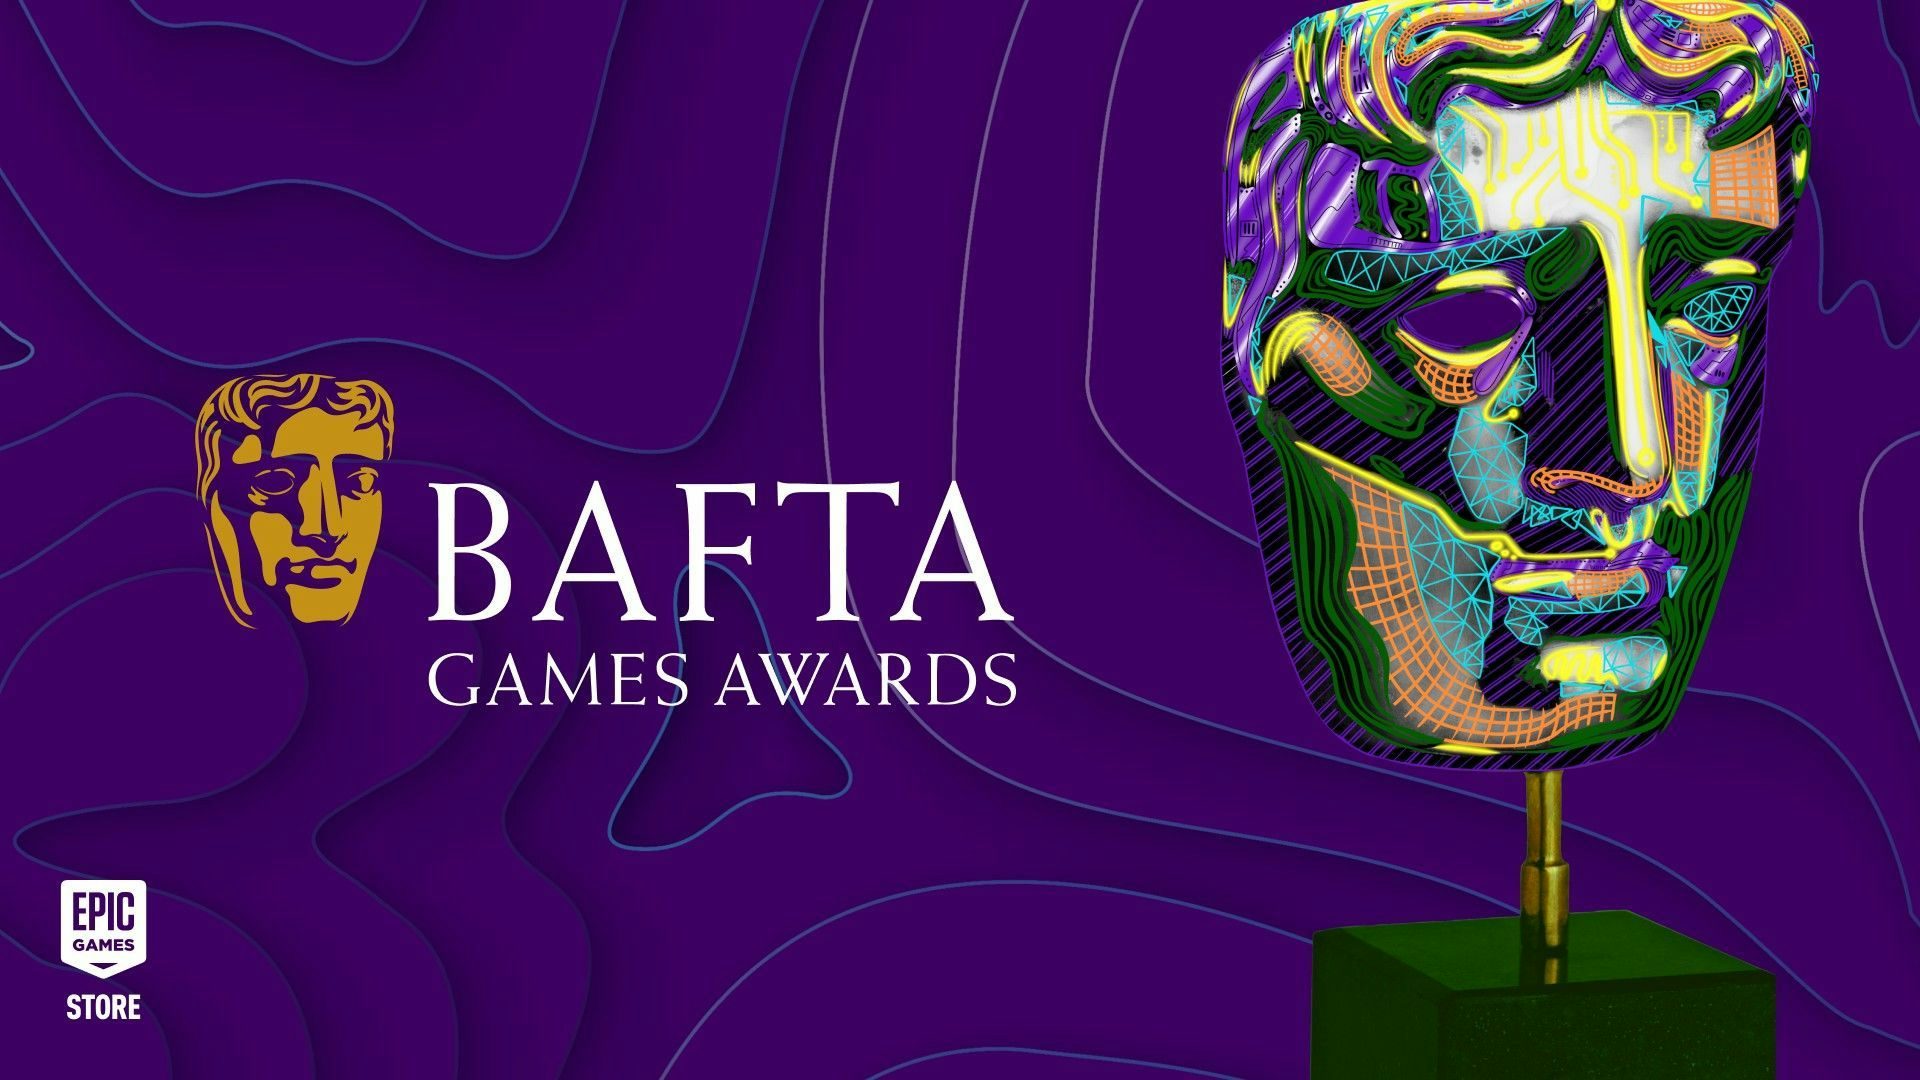 Tell us who should win best game at the BAFTAs and why for $3!